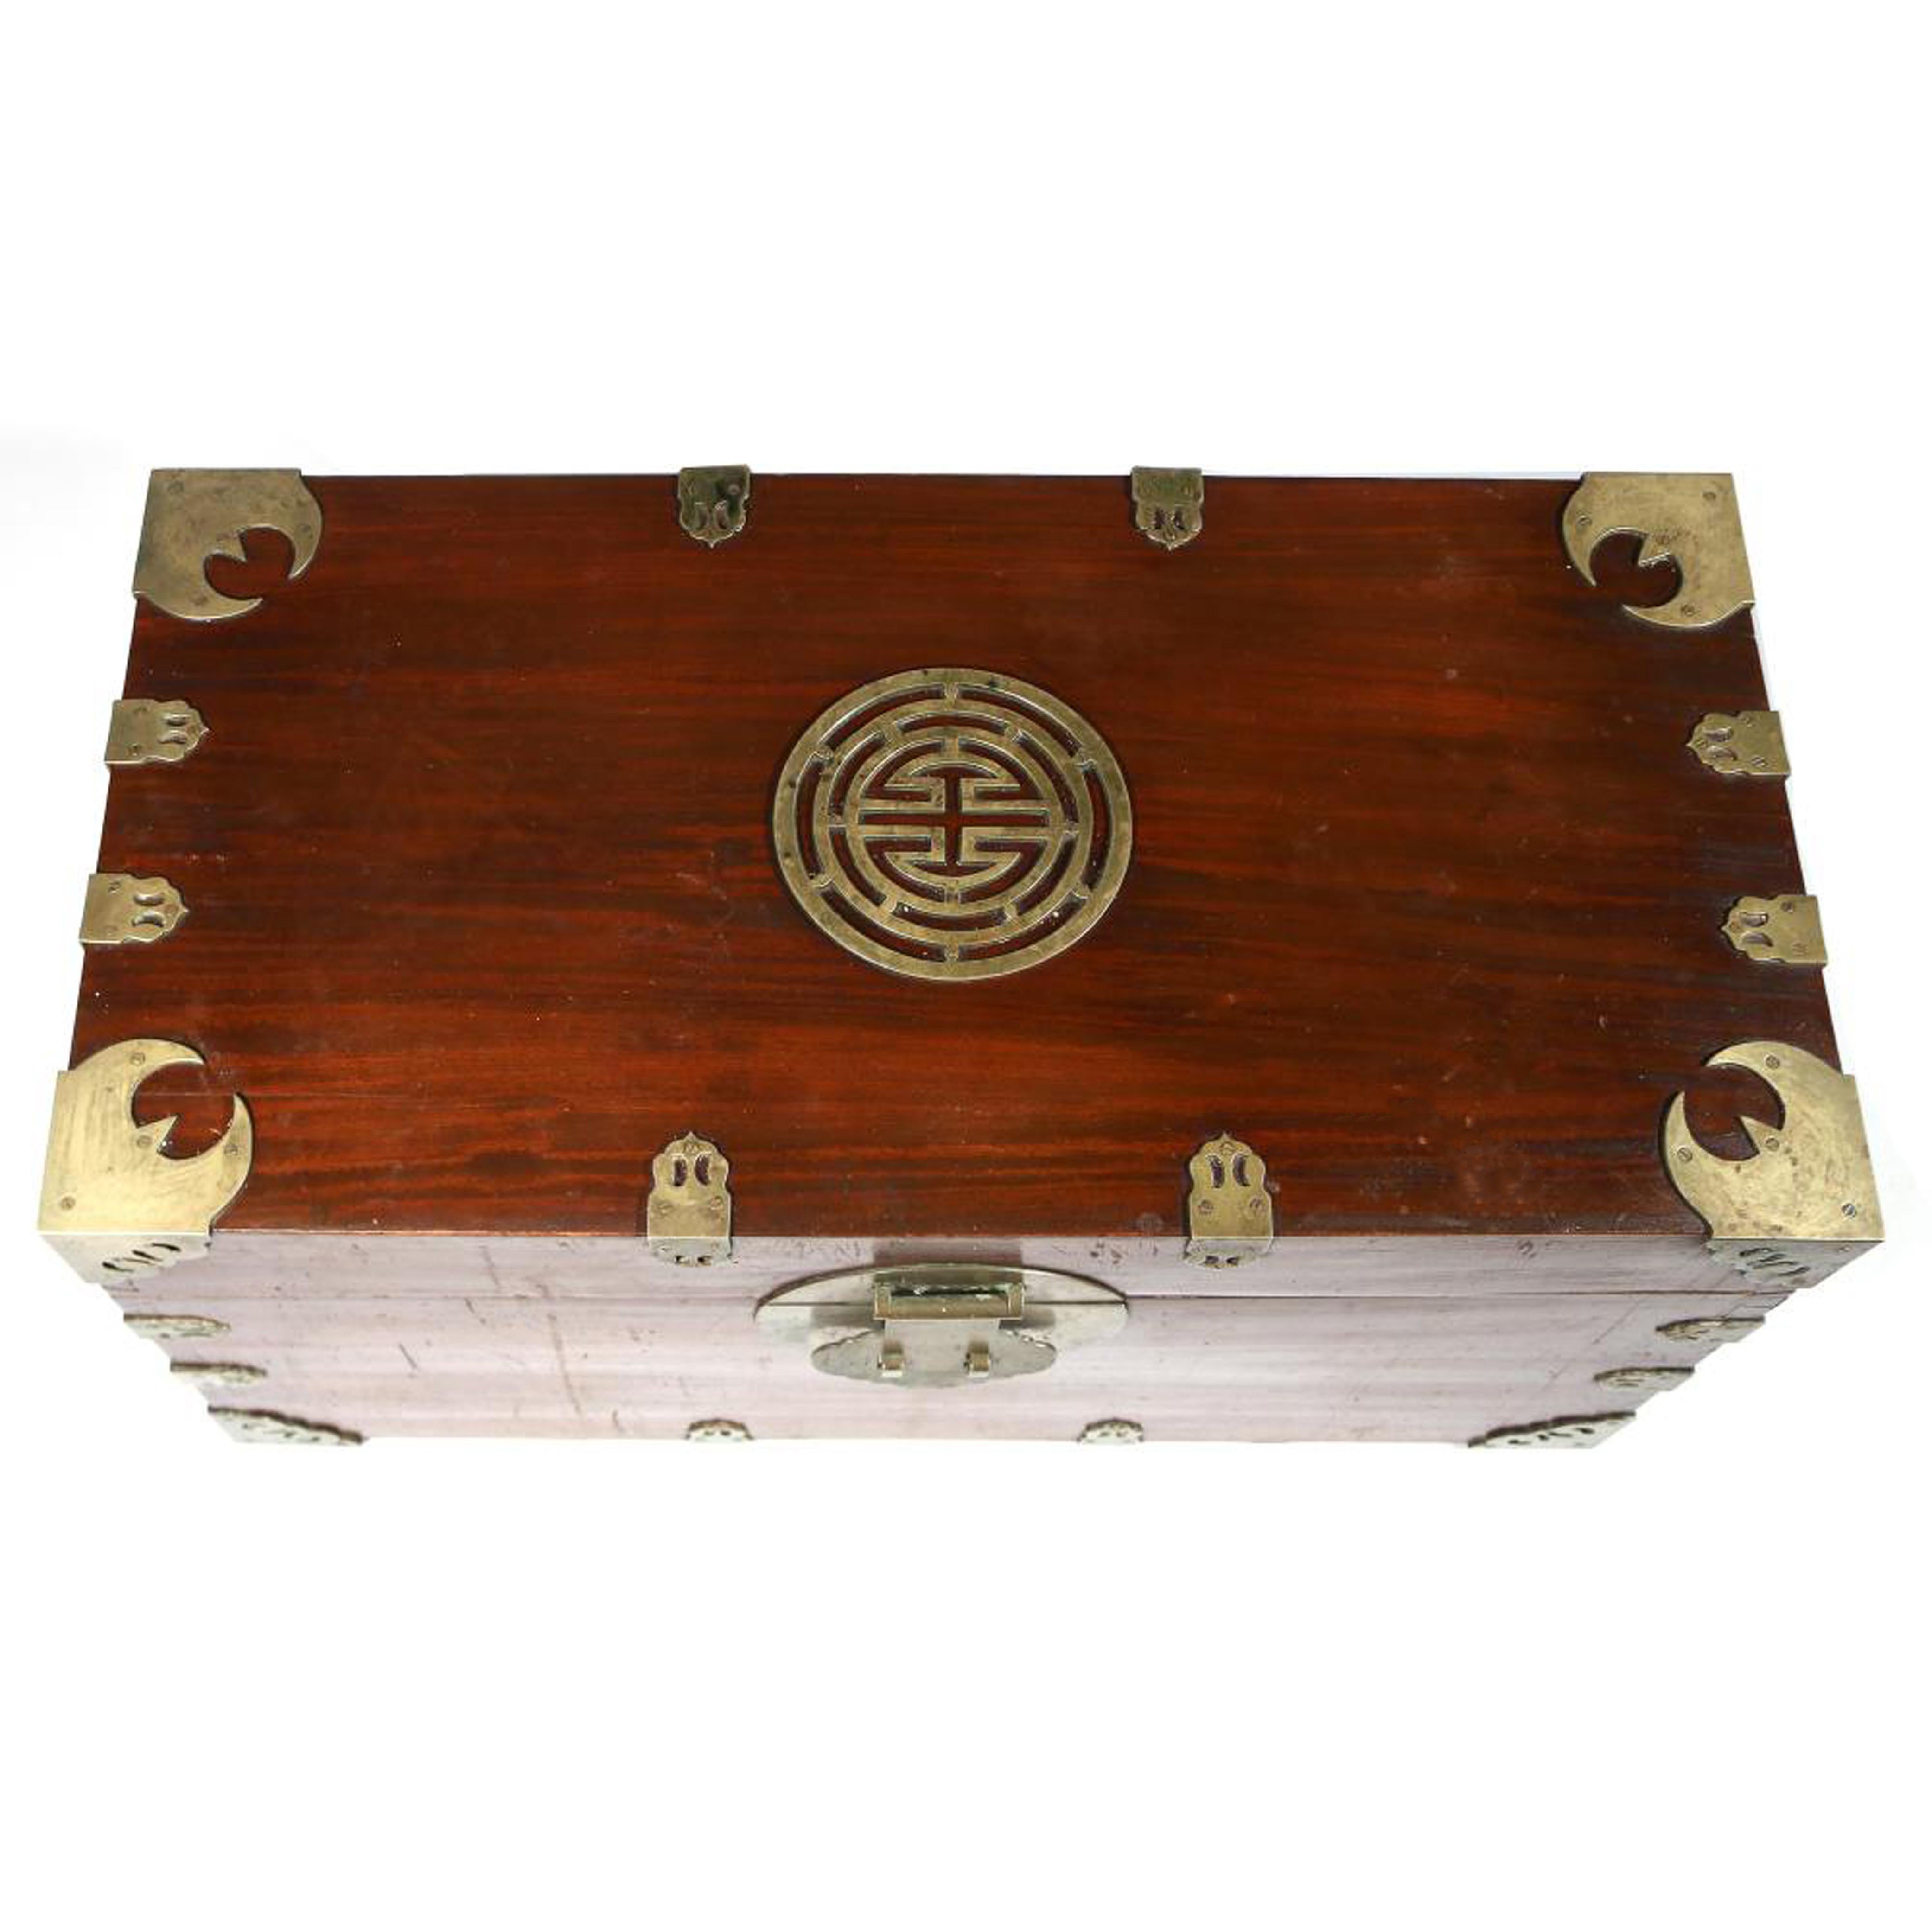 Chinese Export Sailor's Large Brass-bound Camphor Wood Sea or Campaign Chest,
Mid-19th Century.

A large rectangular dramatic campaign or sailor's trunk lined with Camphor wood and with interior inset drawer, the exterior with brass corners and